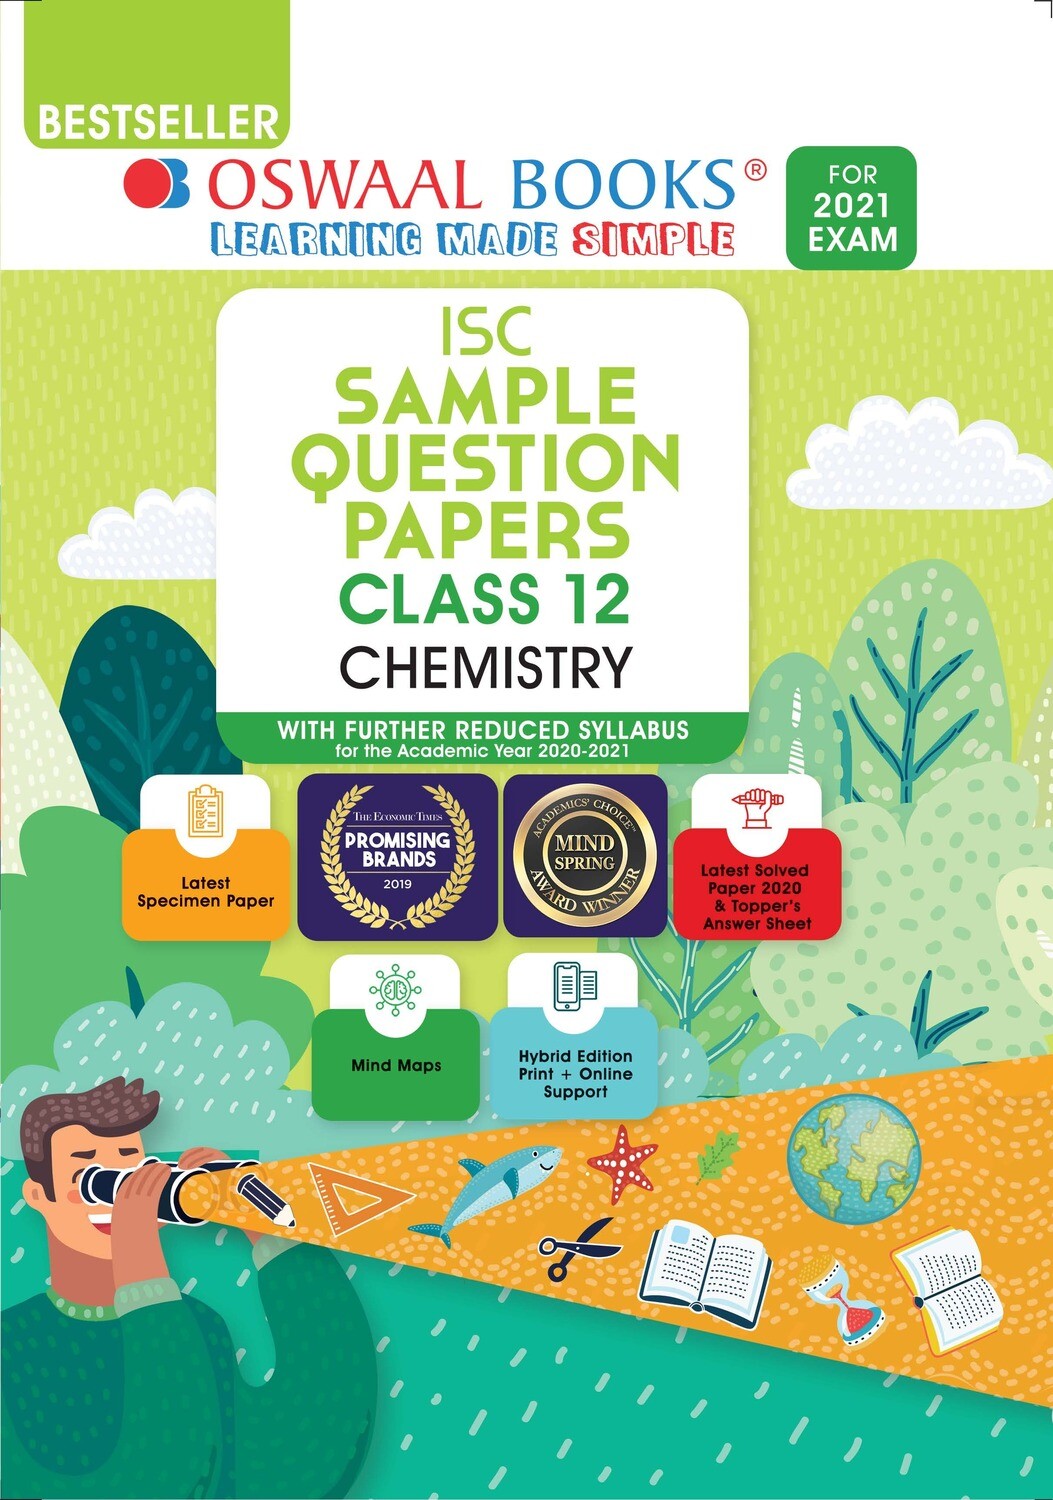 Buy e-book: Oswaal ISC Sample Question Papers Class 12 Chemistry (For 2021 Exam)